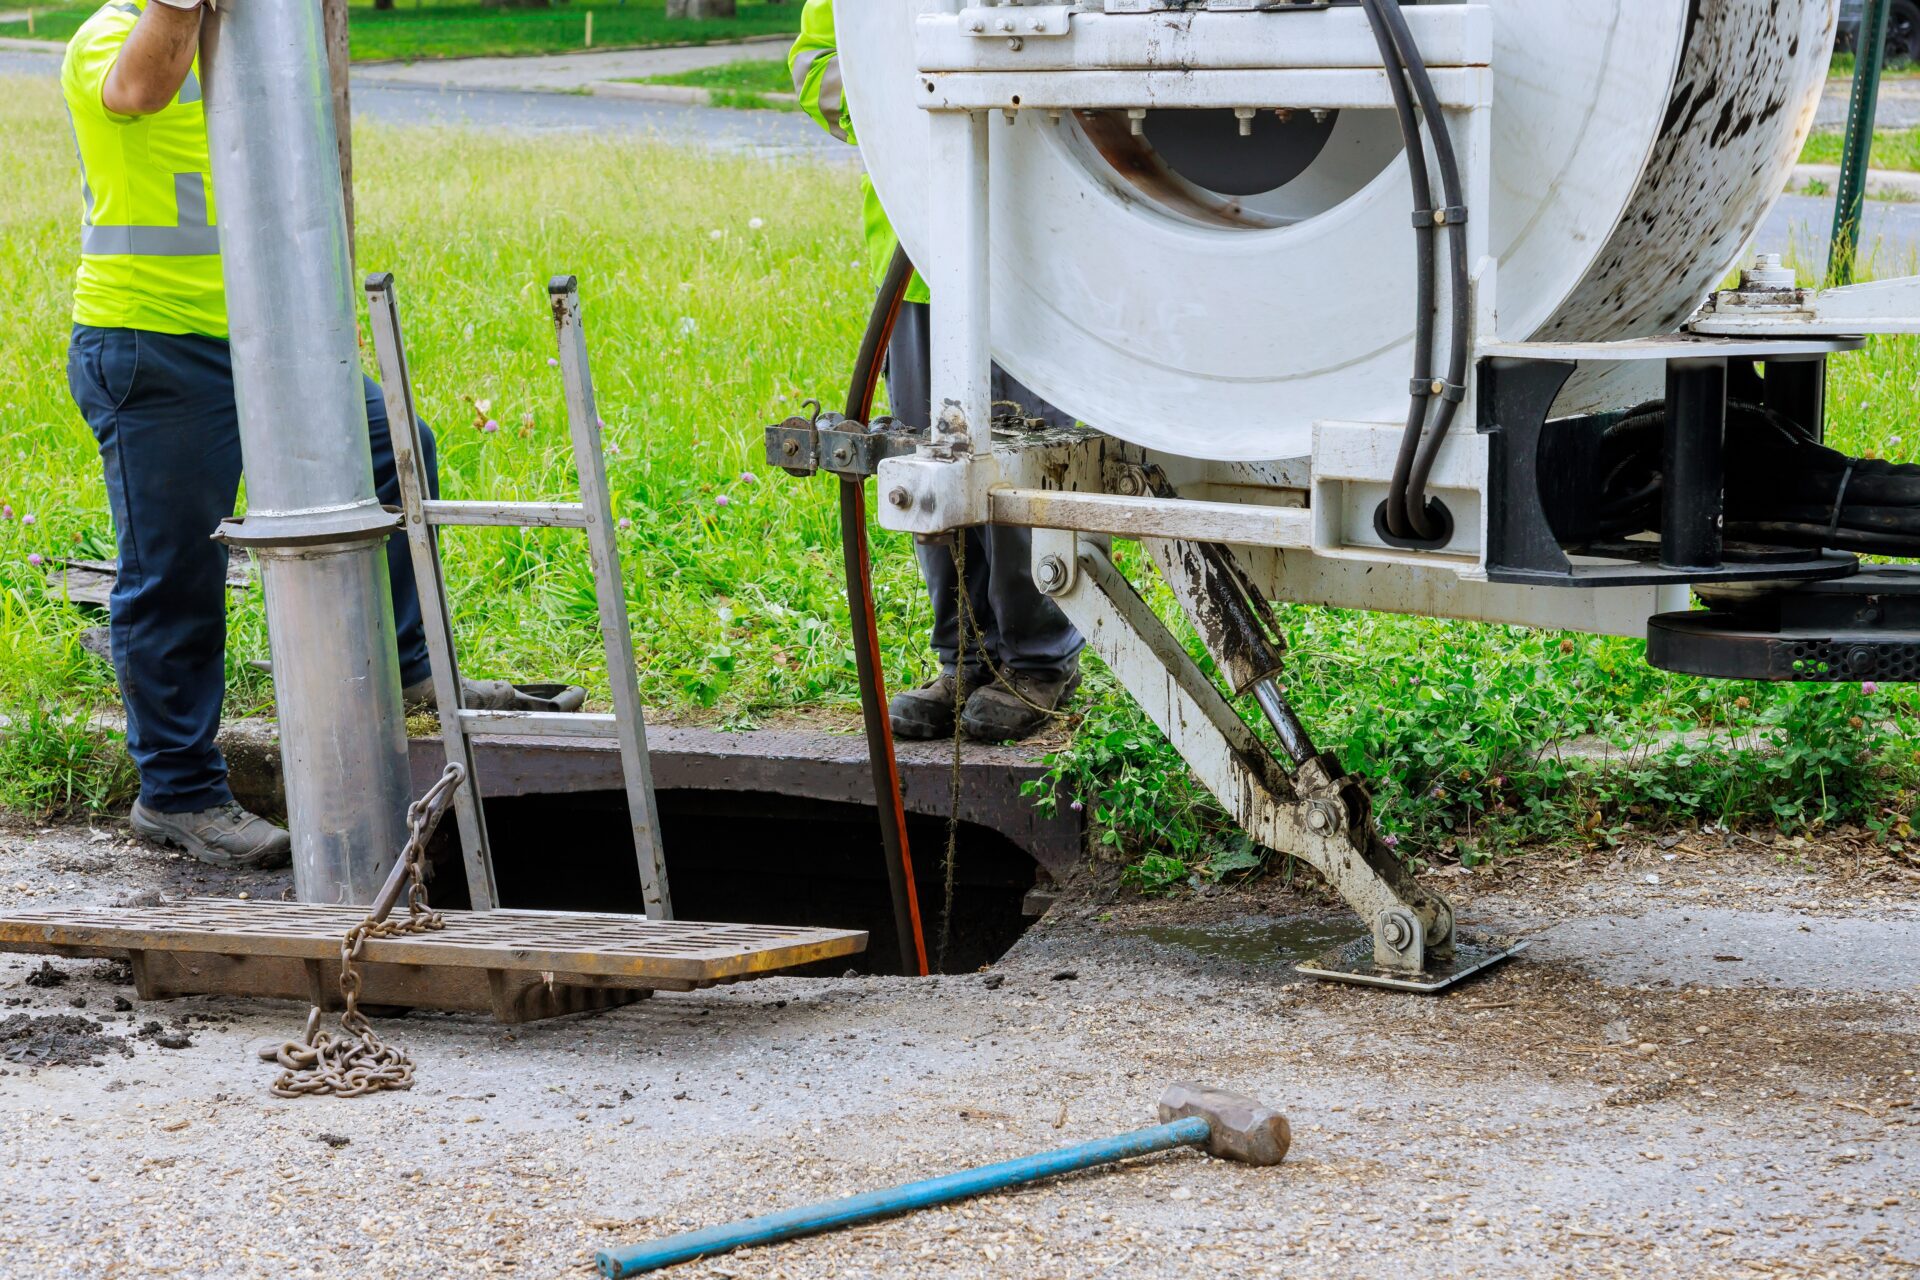 Machine for cleaning blocked drains | Drain cleaning services in Nashville, TN